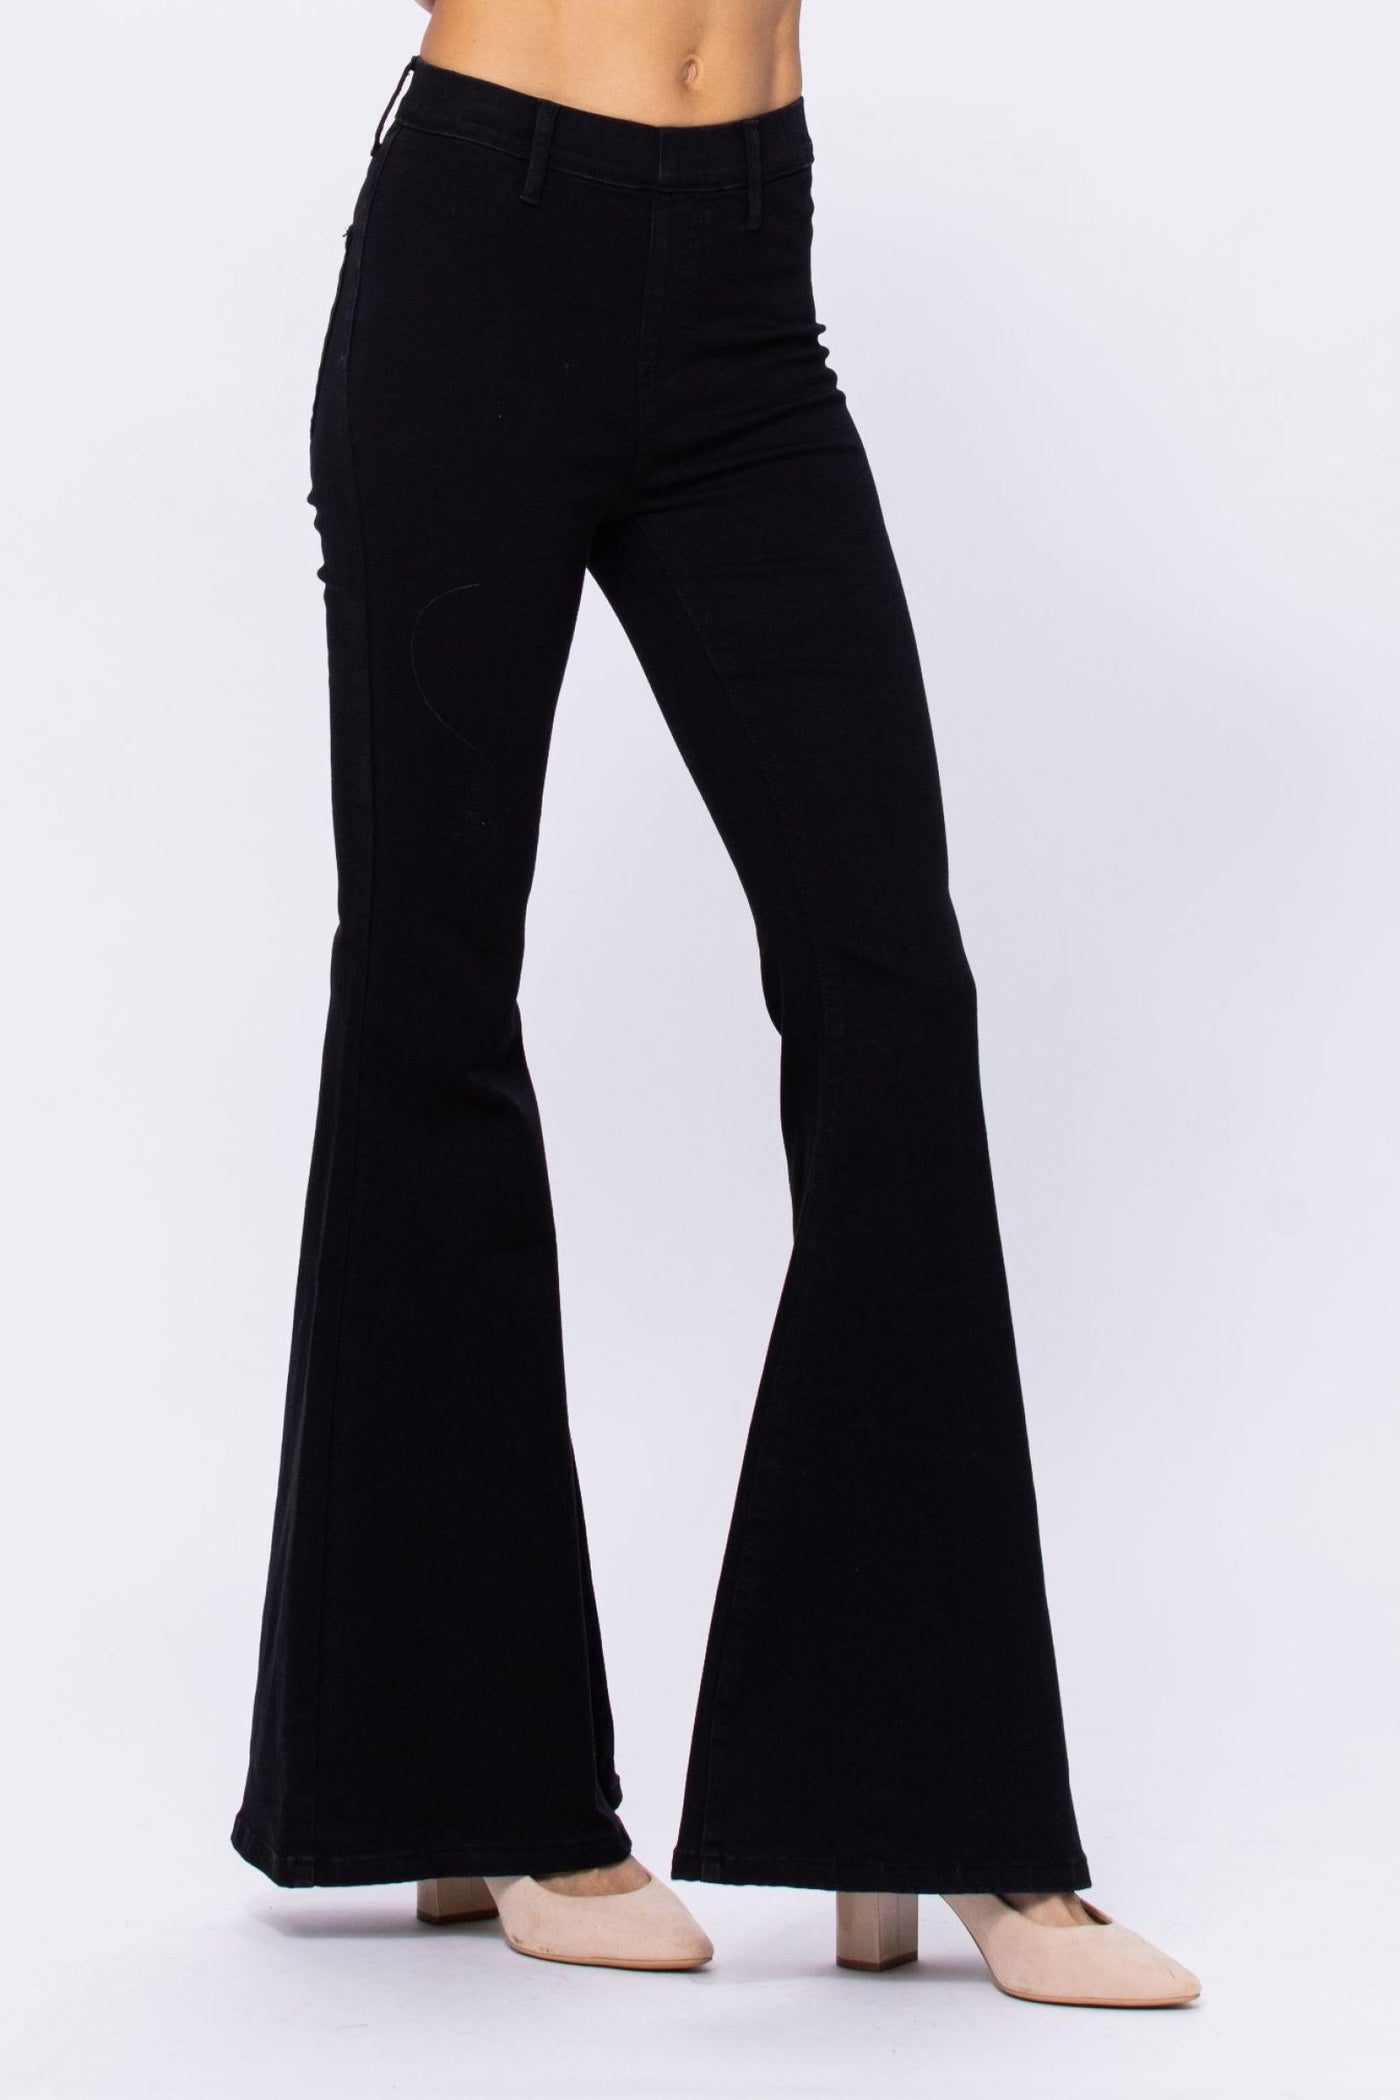 Judy Blue Pull-On Super Flares - Corinne Boutique Family Owned and Operated USA